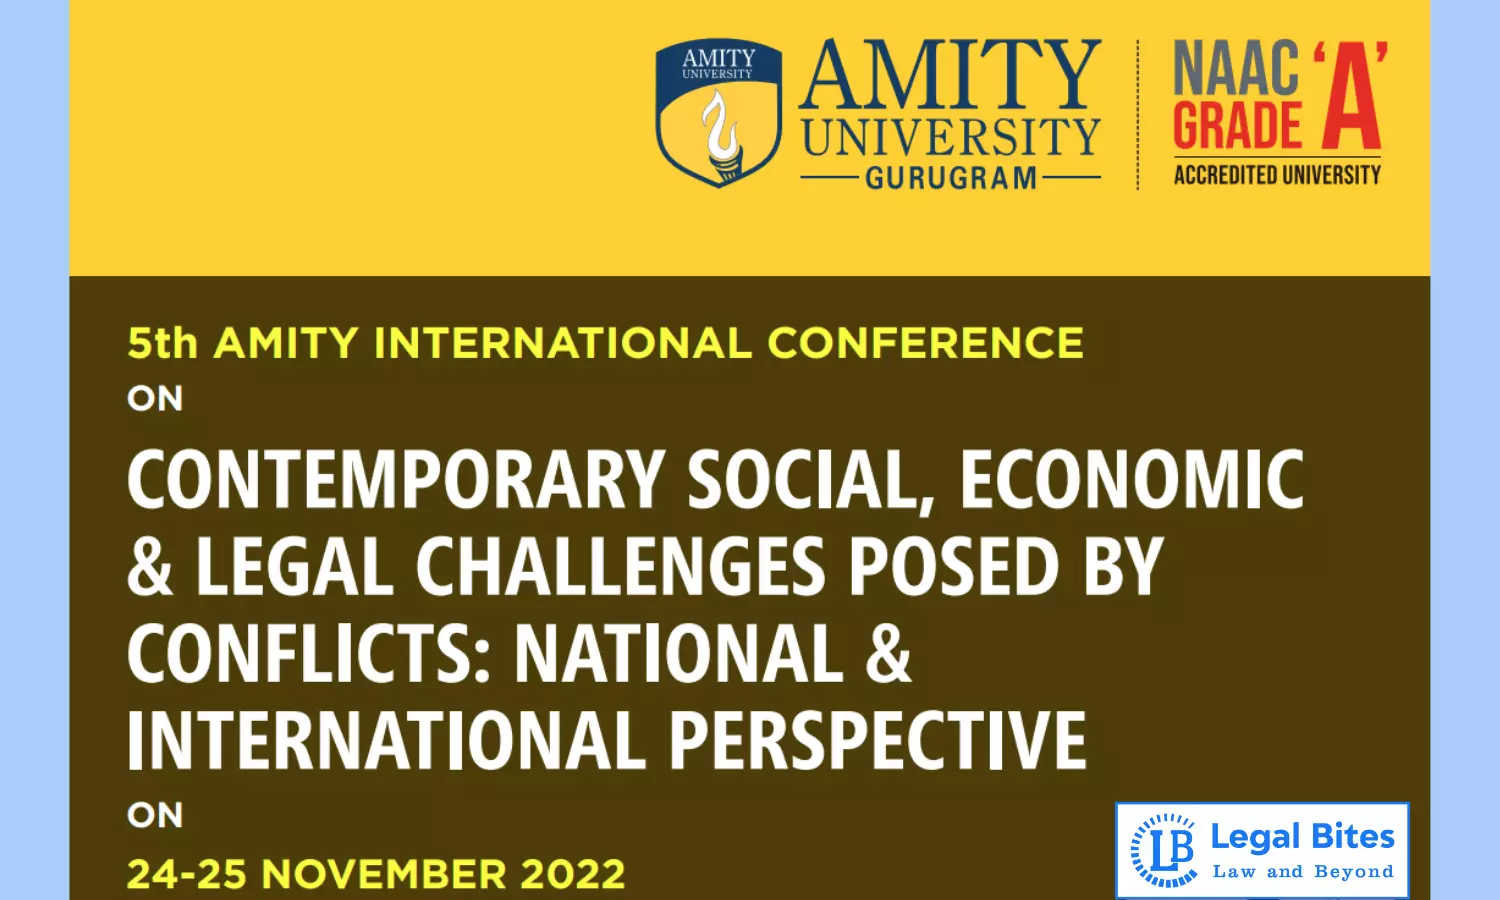 5th Amity International Conference 2022 on Contemporary Social, Economic and Legal Challenges Posed by Conflicts: National and International Perspective | 24-25 Nov 2022 (OFFLINE)